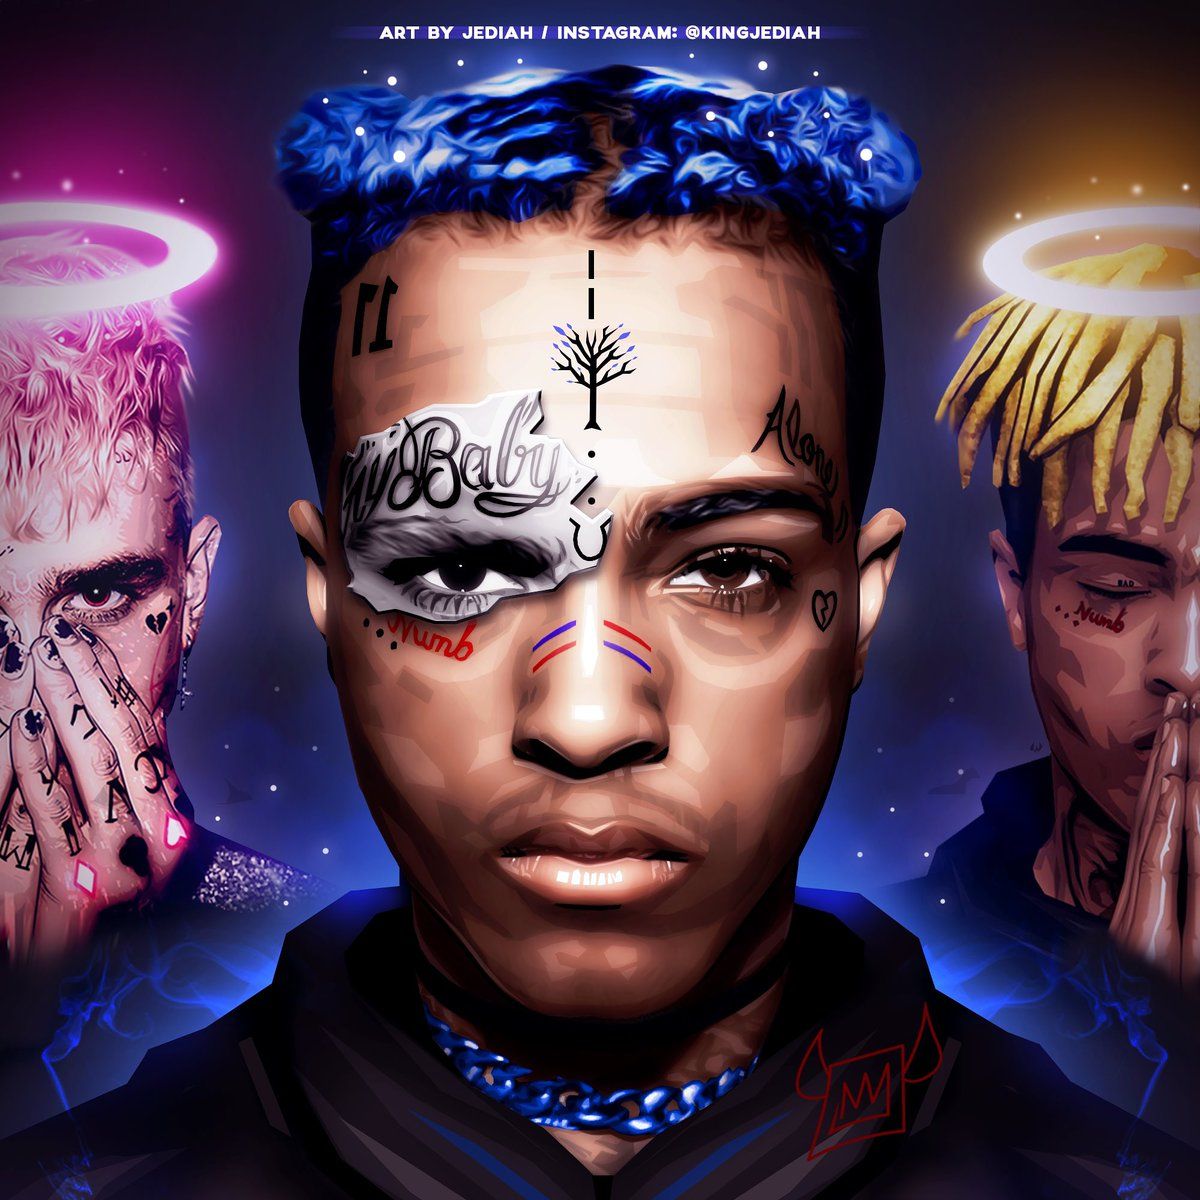 Free download Steam Workshop xxxTentacion and Lil Peep animated